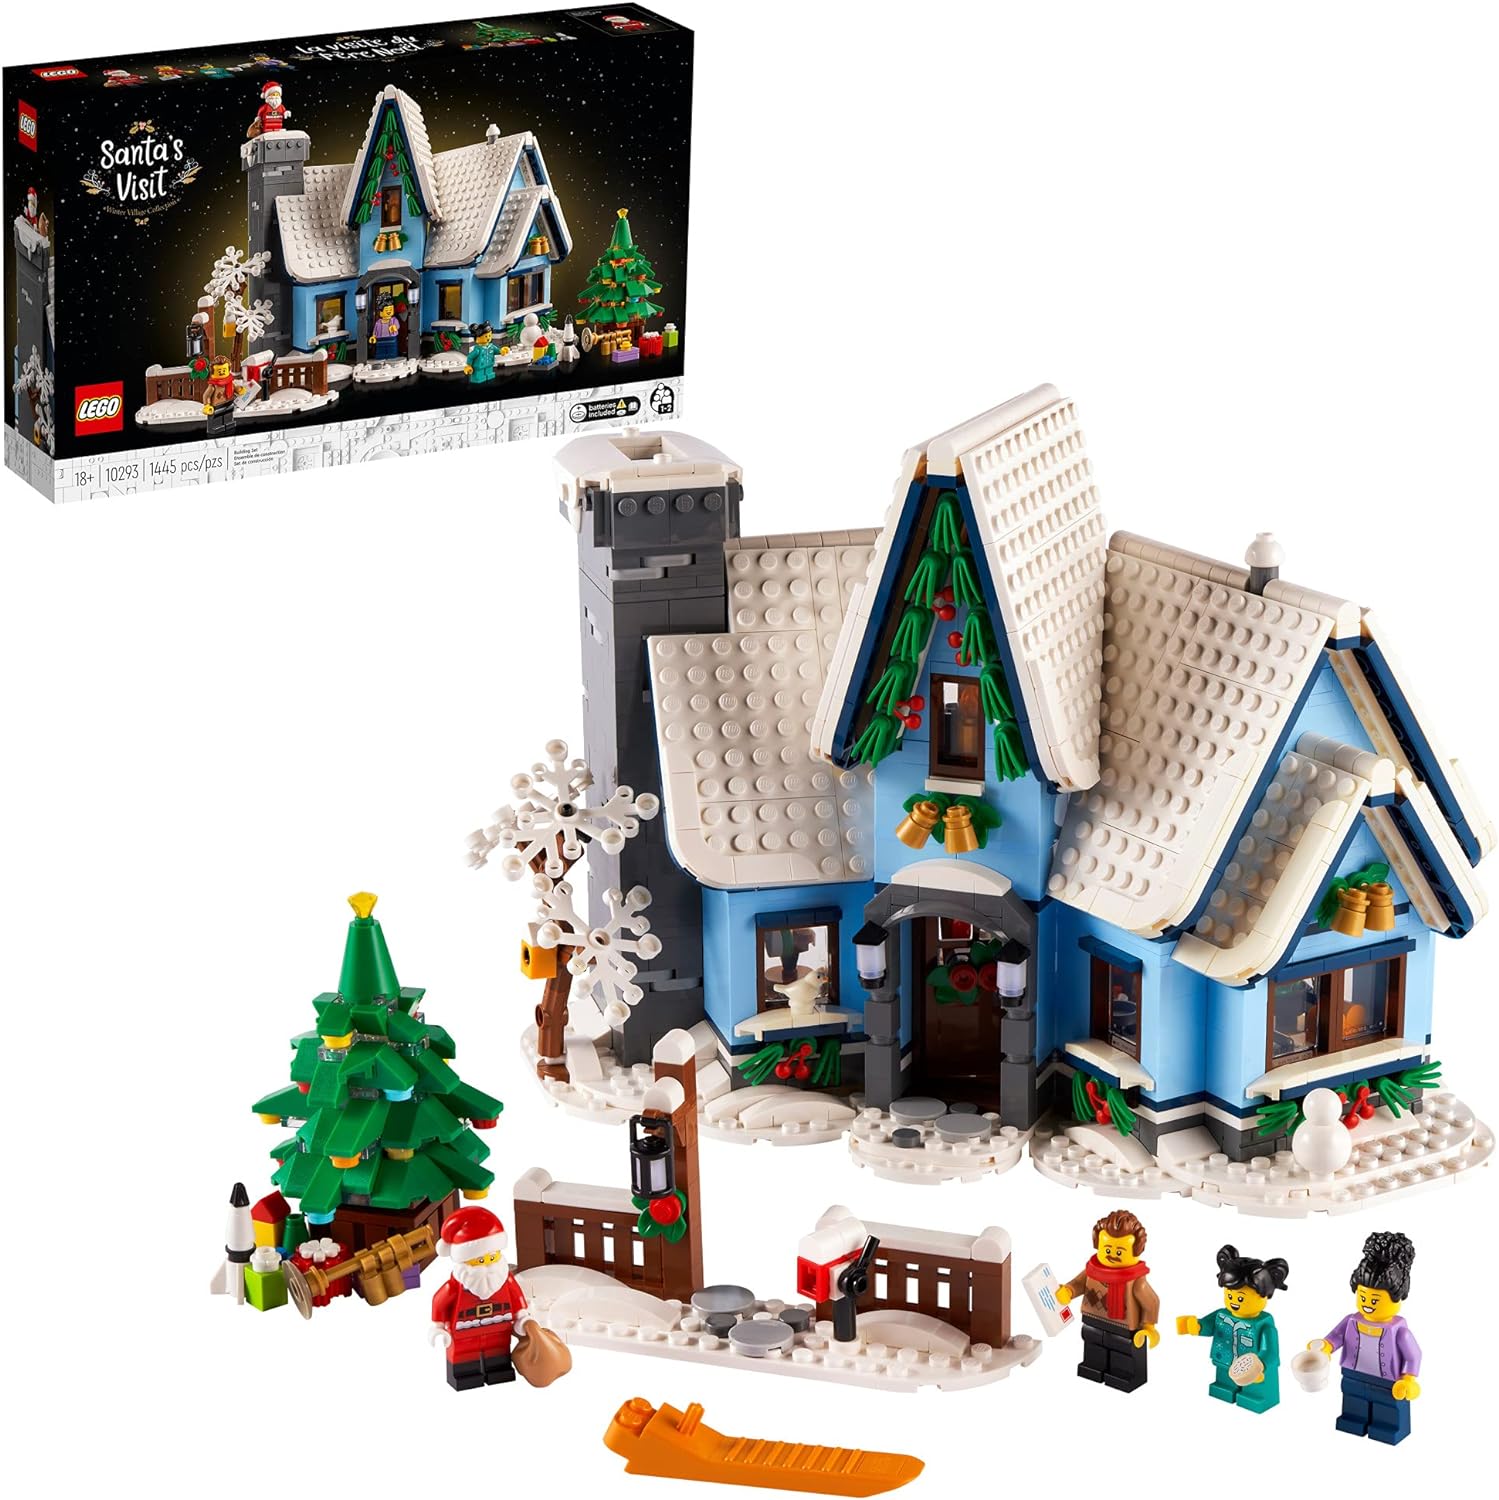 LEGO 10293  Icons Santa’s Visit Christmas House Model Building Set for Adults and Families, Festive Home Décor with Xmas Tree, Gift Idea